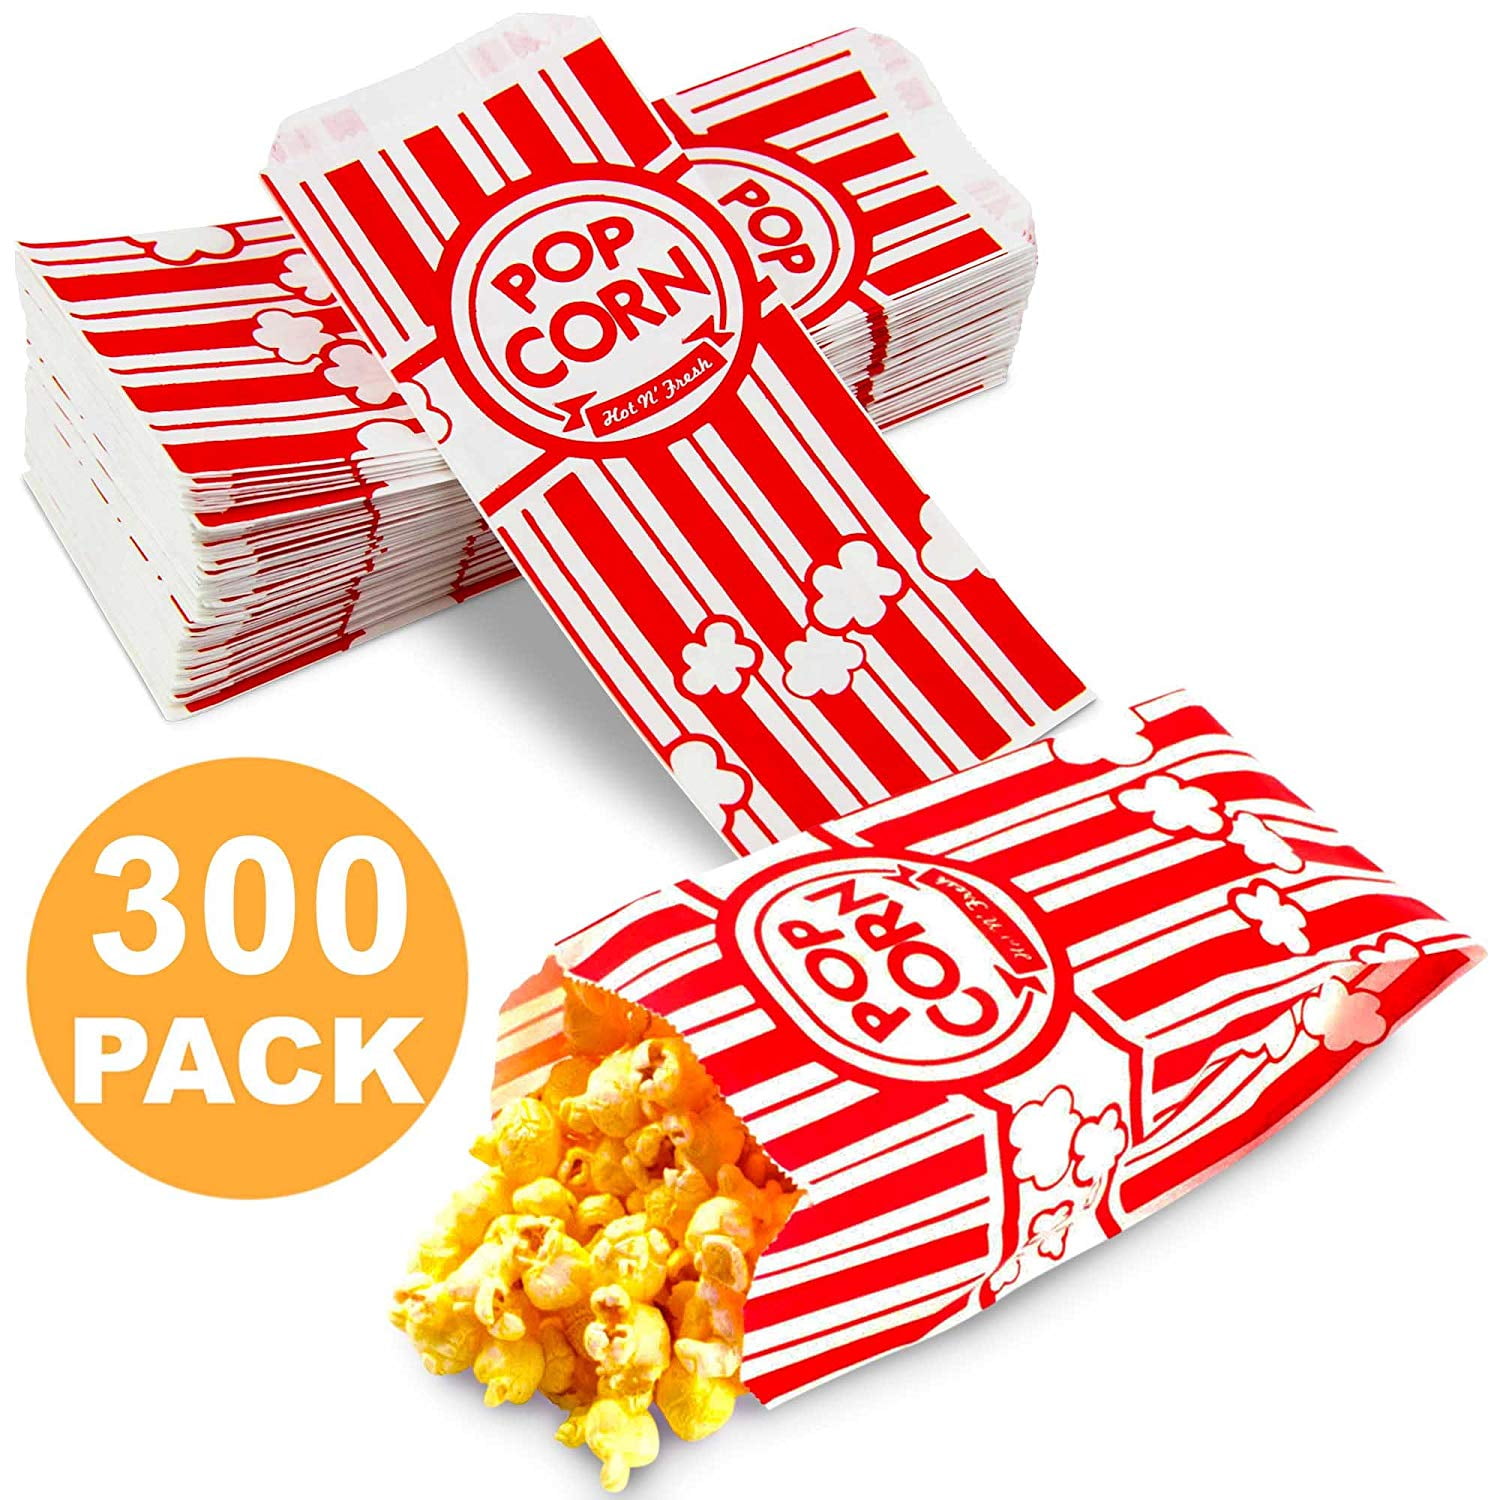 1 Oz Popcorn Bag Red & White Dispsoable Carnival Popcorn Bags 200 Count